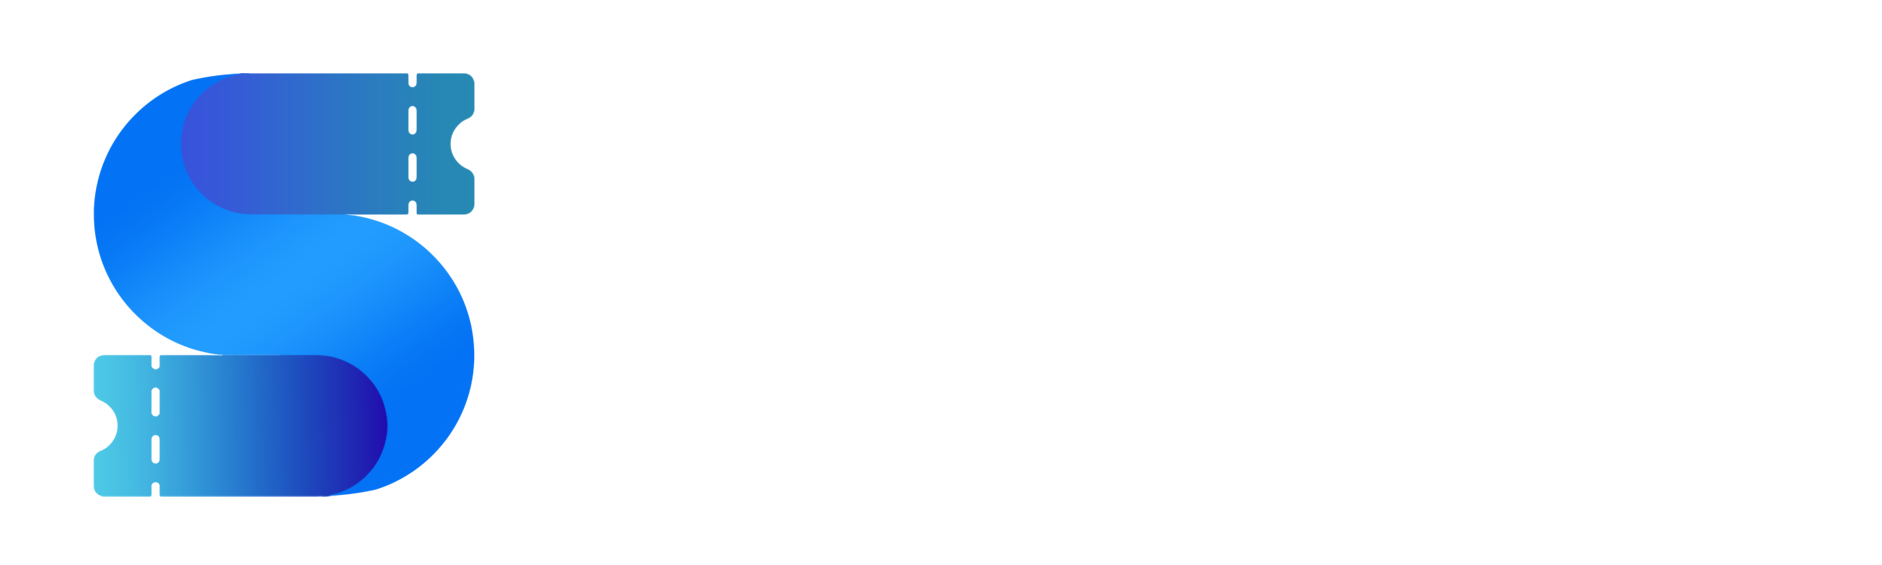 Sellout Events ticket marketplace logo